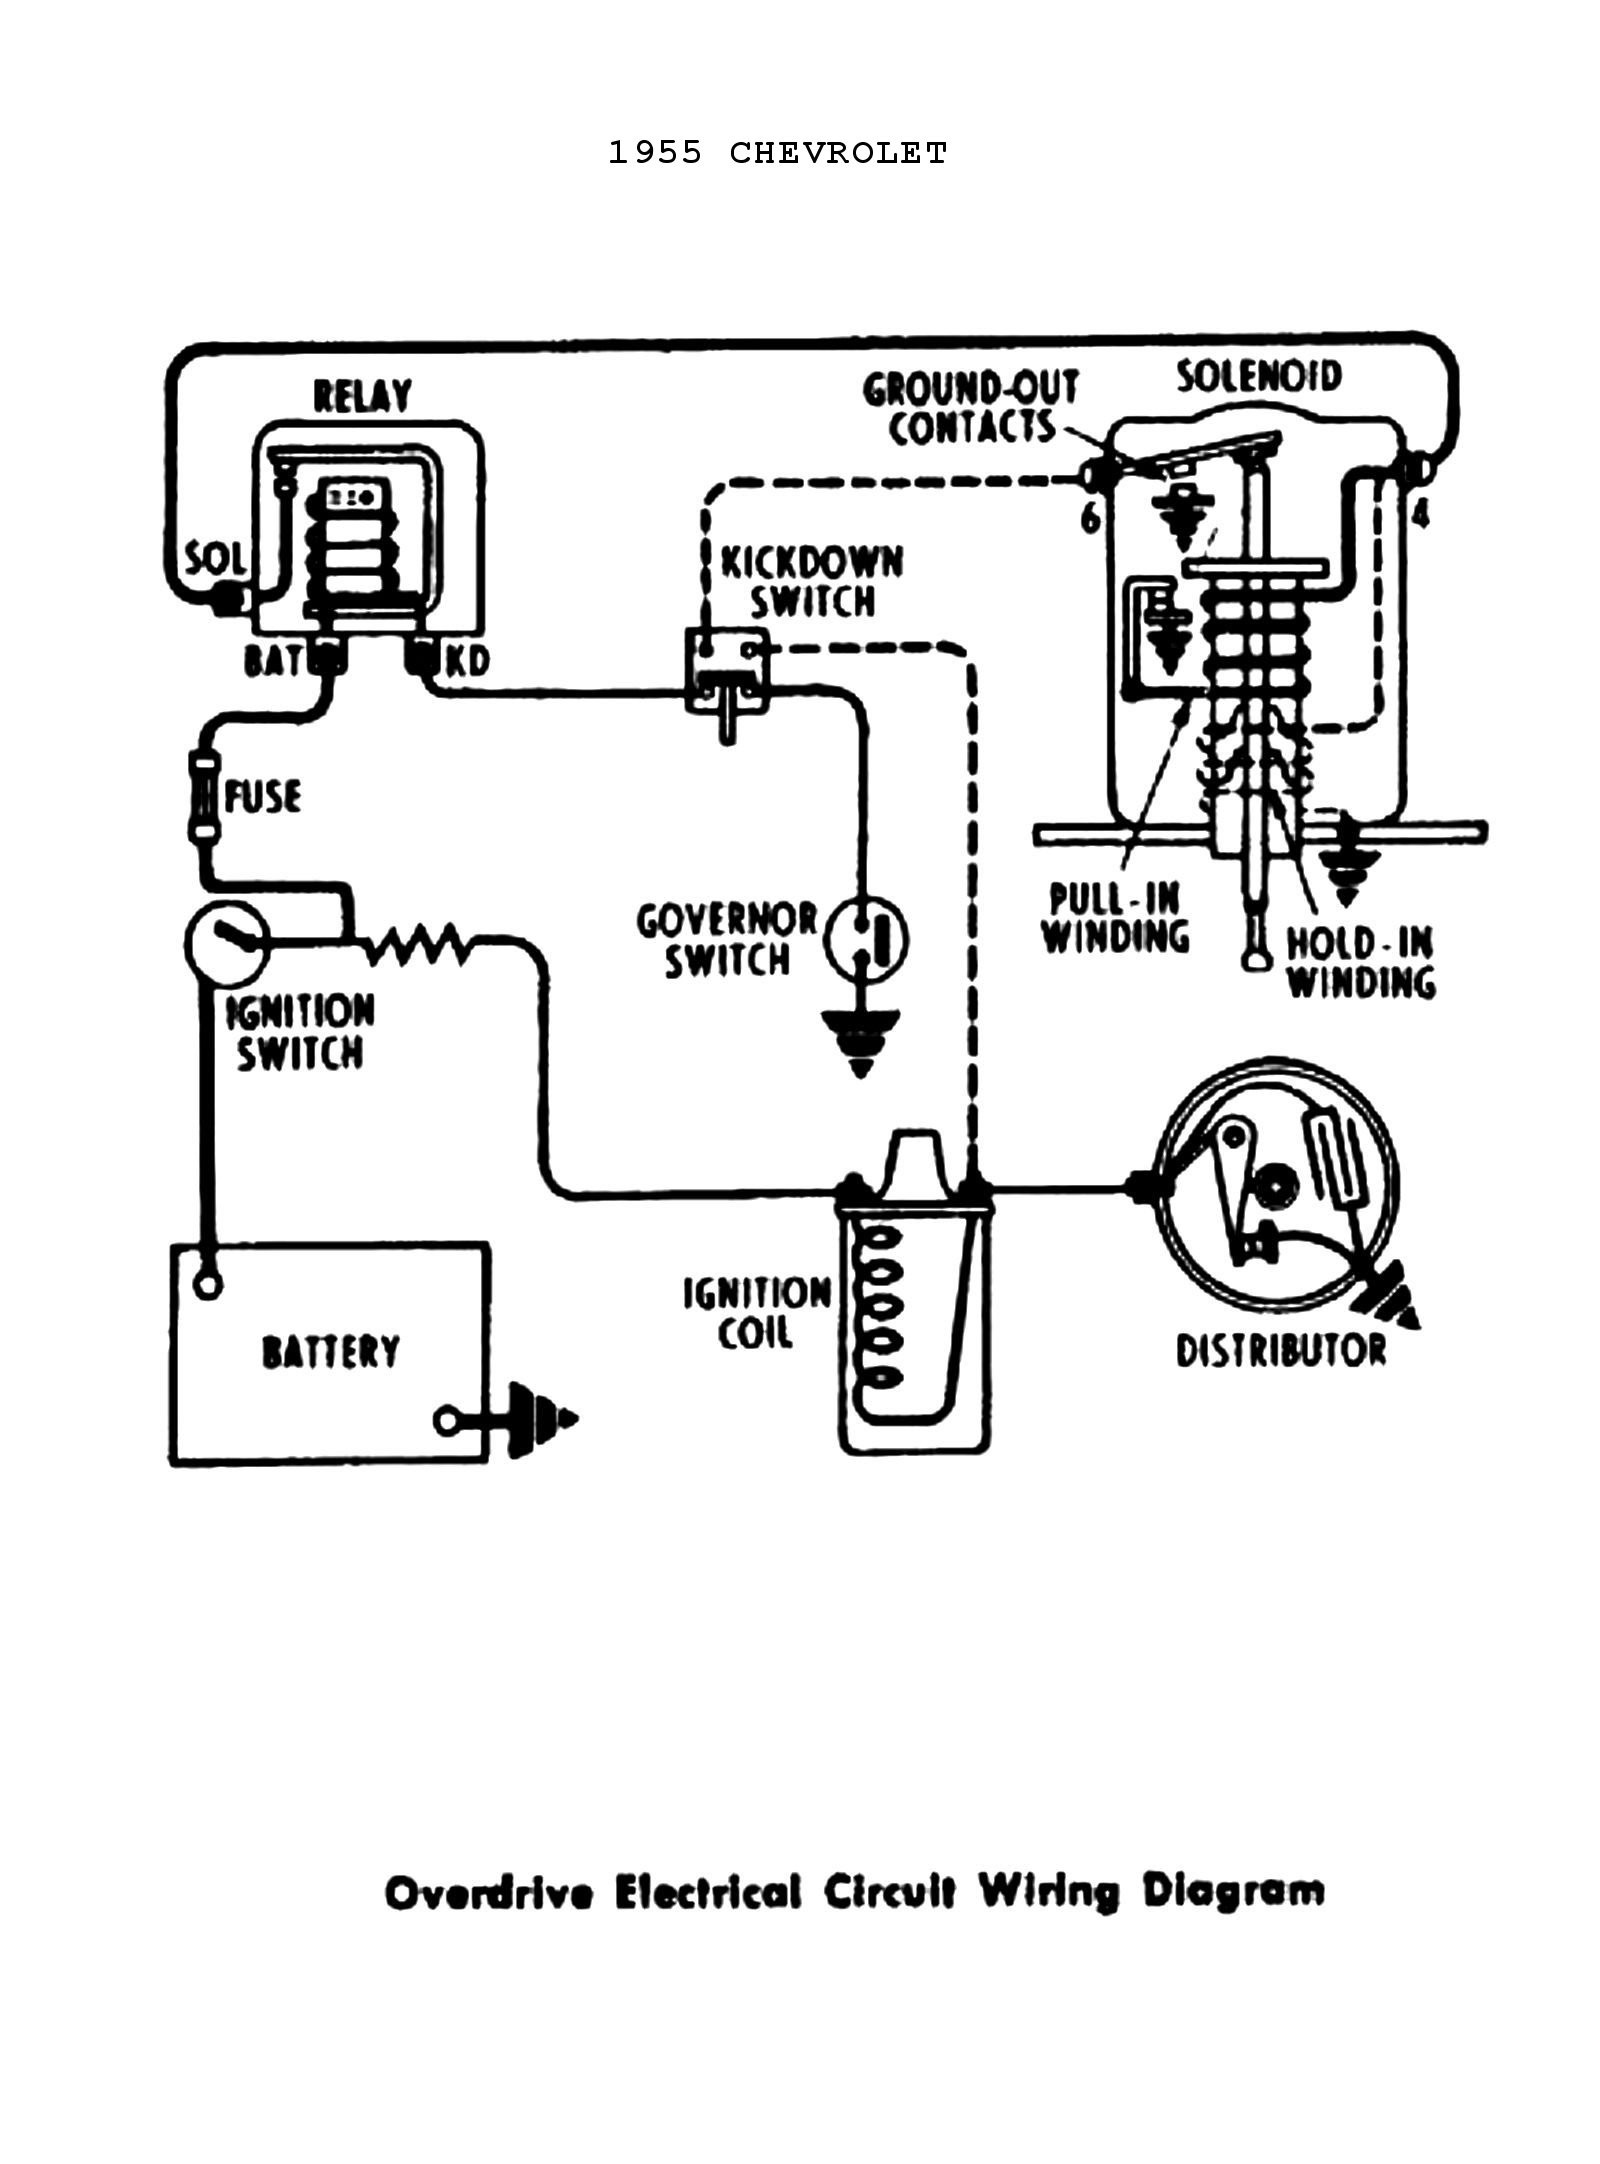 216 Chevy Engine Diagram Chevy Wiring Diagrams Of 216 Chevy Engine Diagram